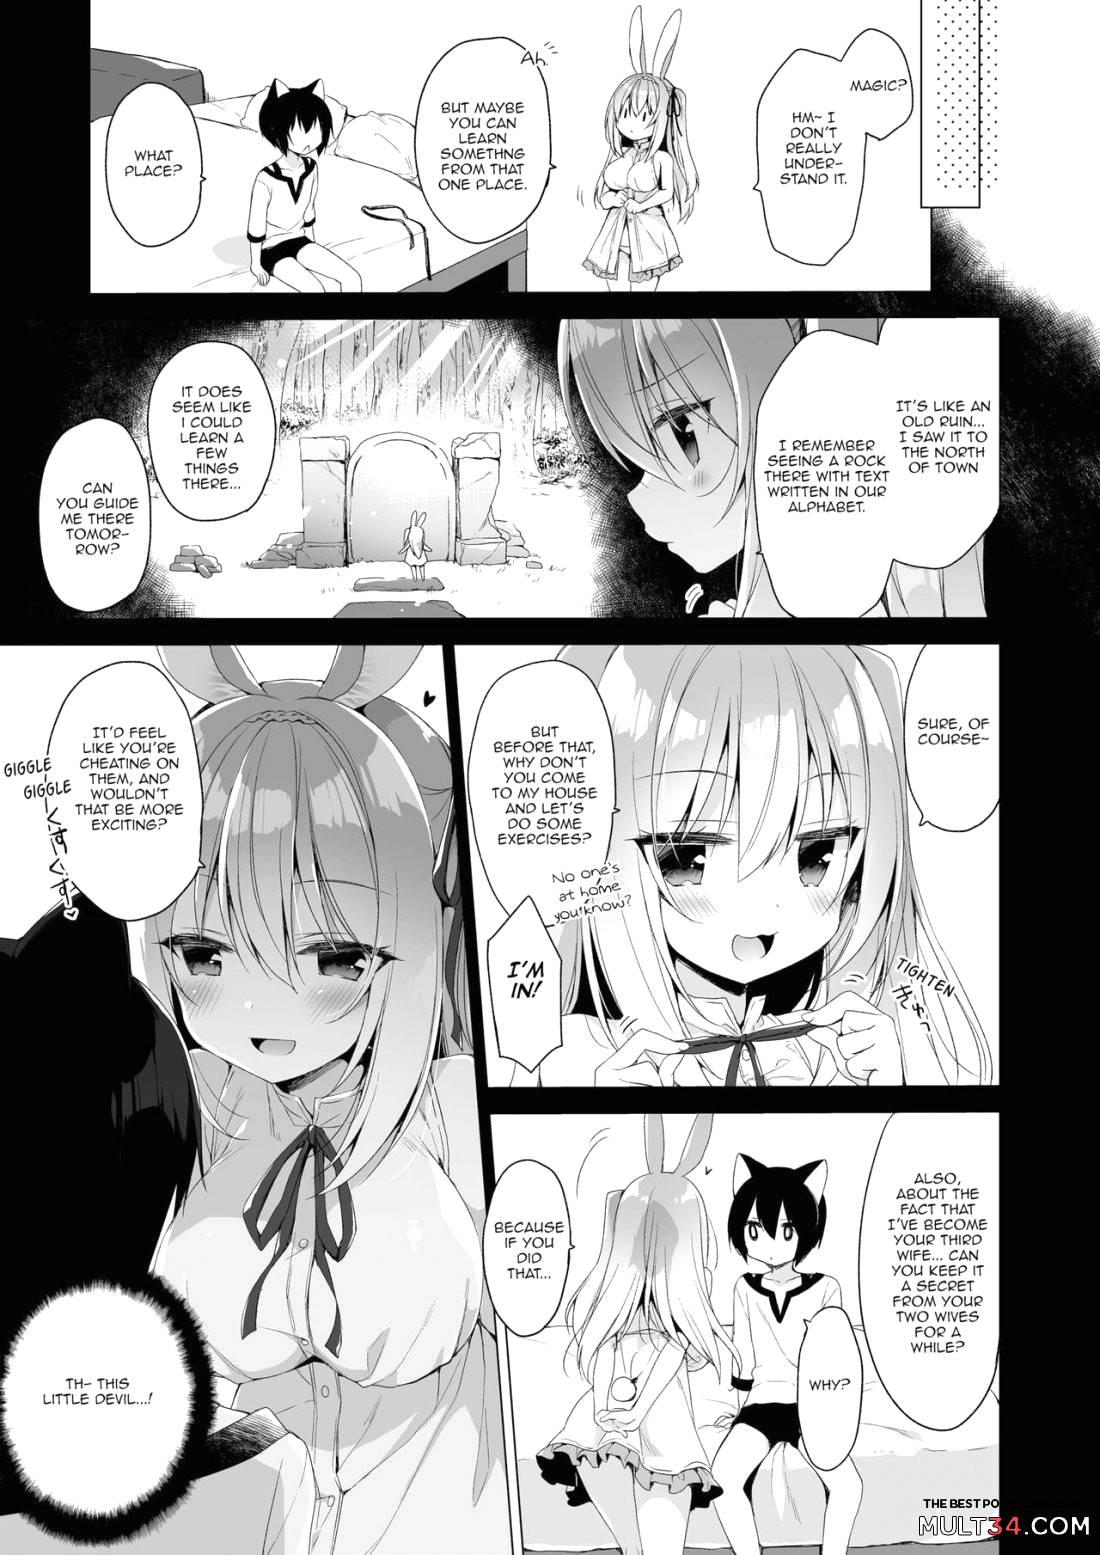 My Ideal Life in Another World Vol. 7 page 20